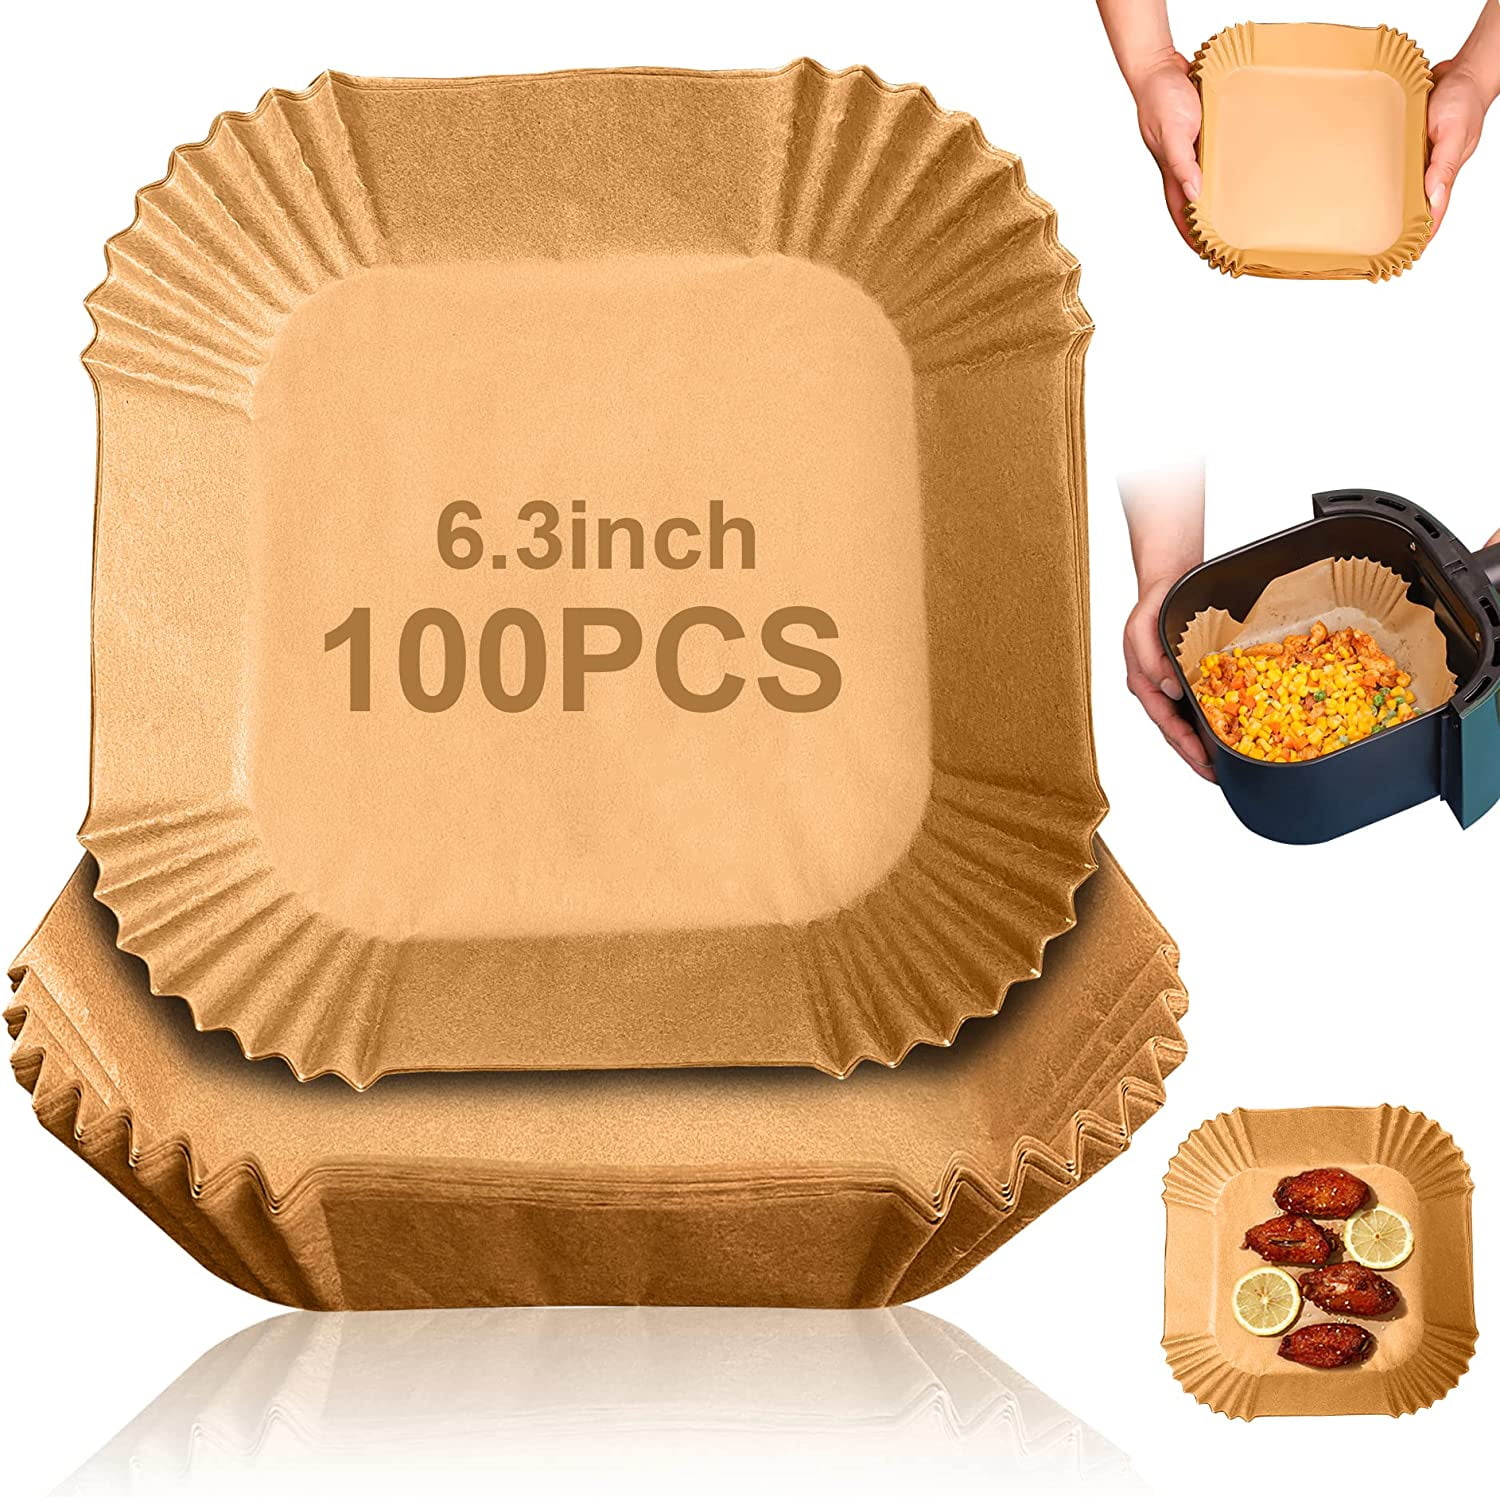 Comfitime Air Fryer Liners 6.3 Round/Square Disposable Parchment Paper Sheets, Unbleached, Non-Stick, Water/Oil/Greaseproof, Oven Baking Paper Liners